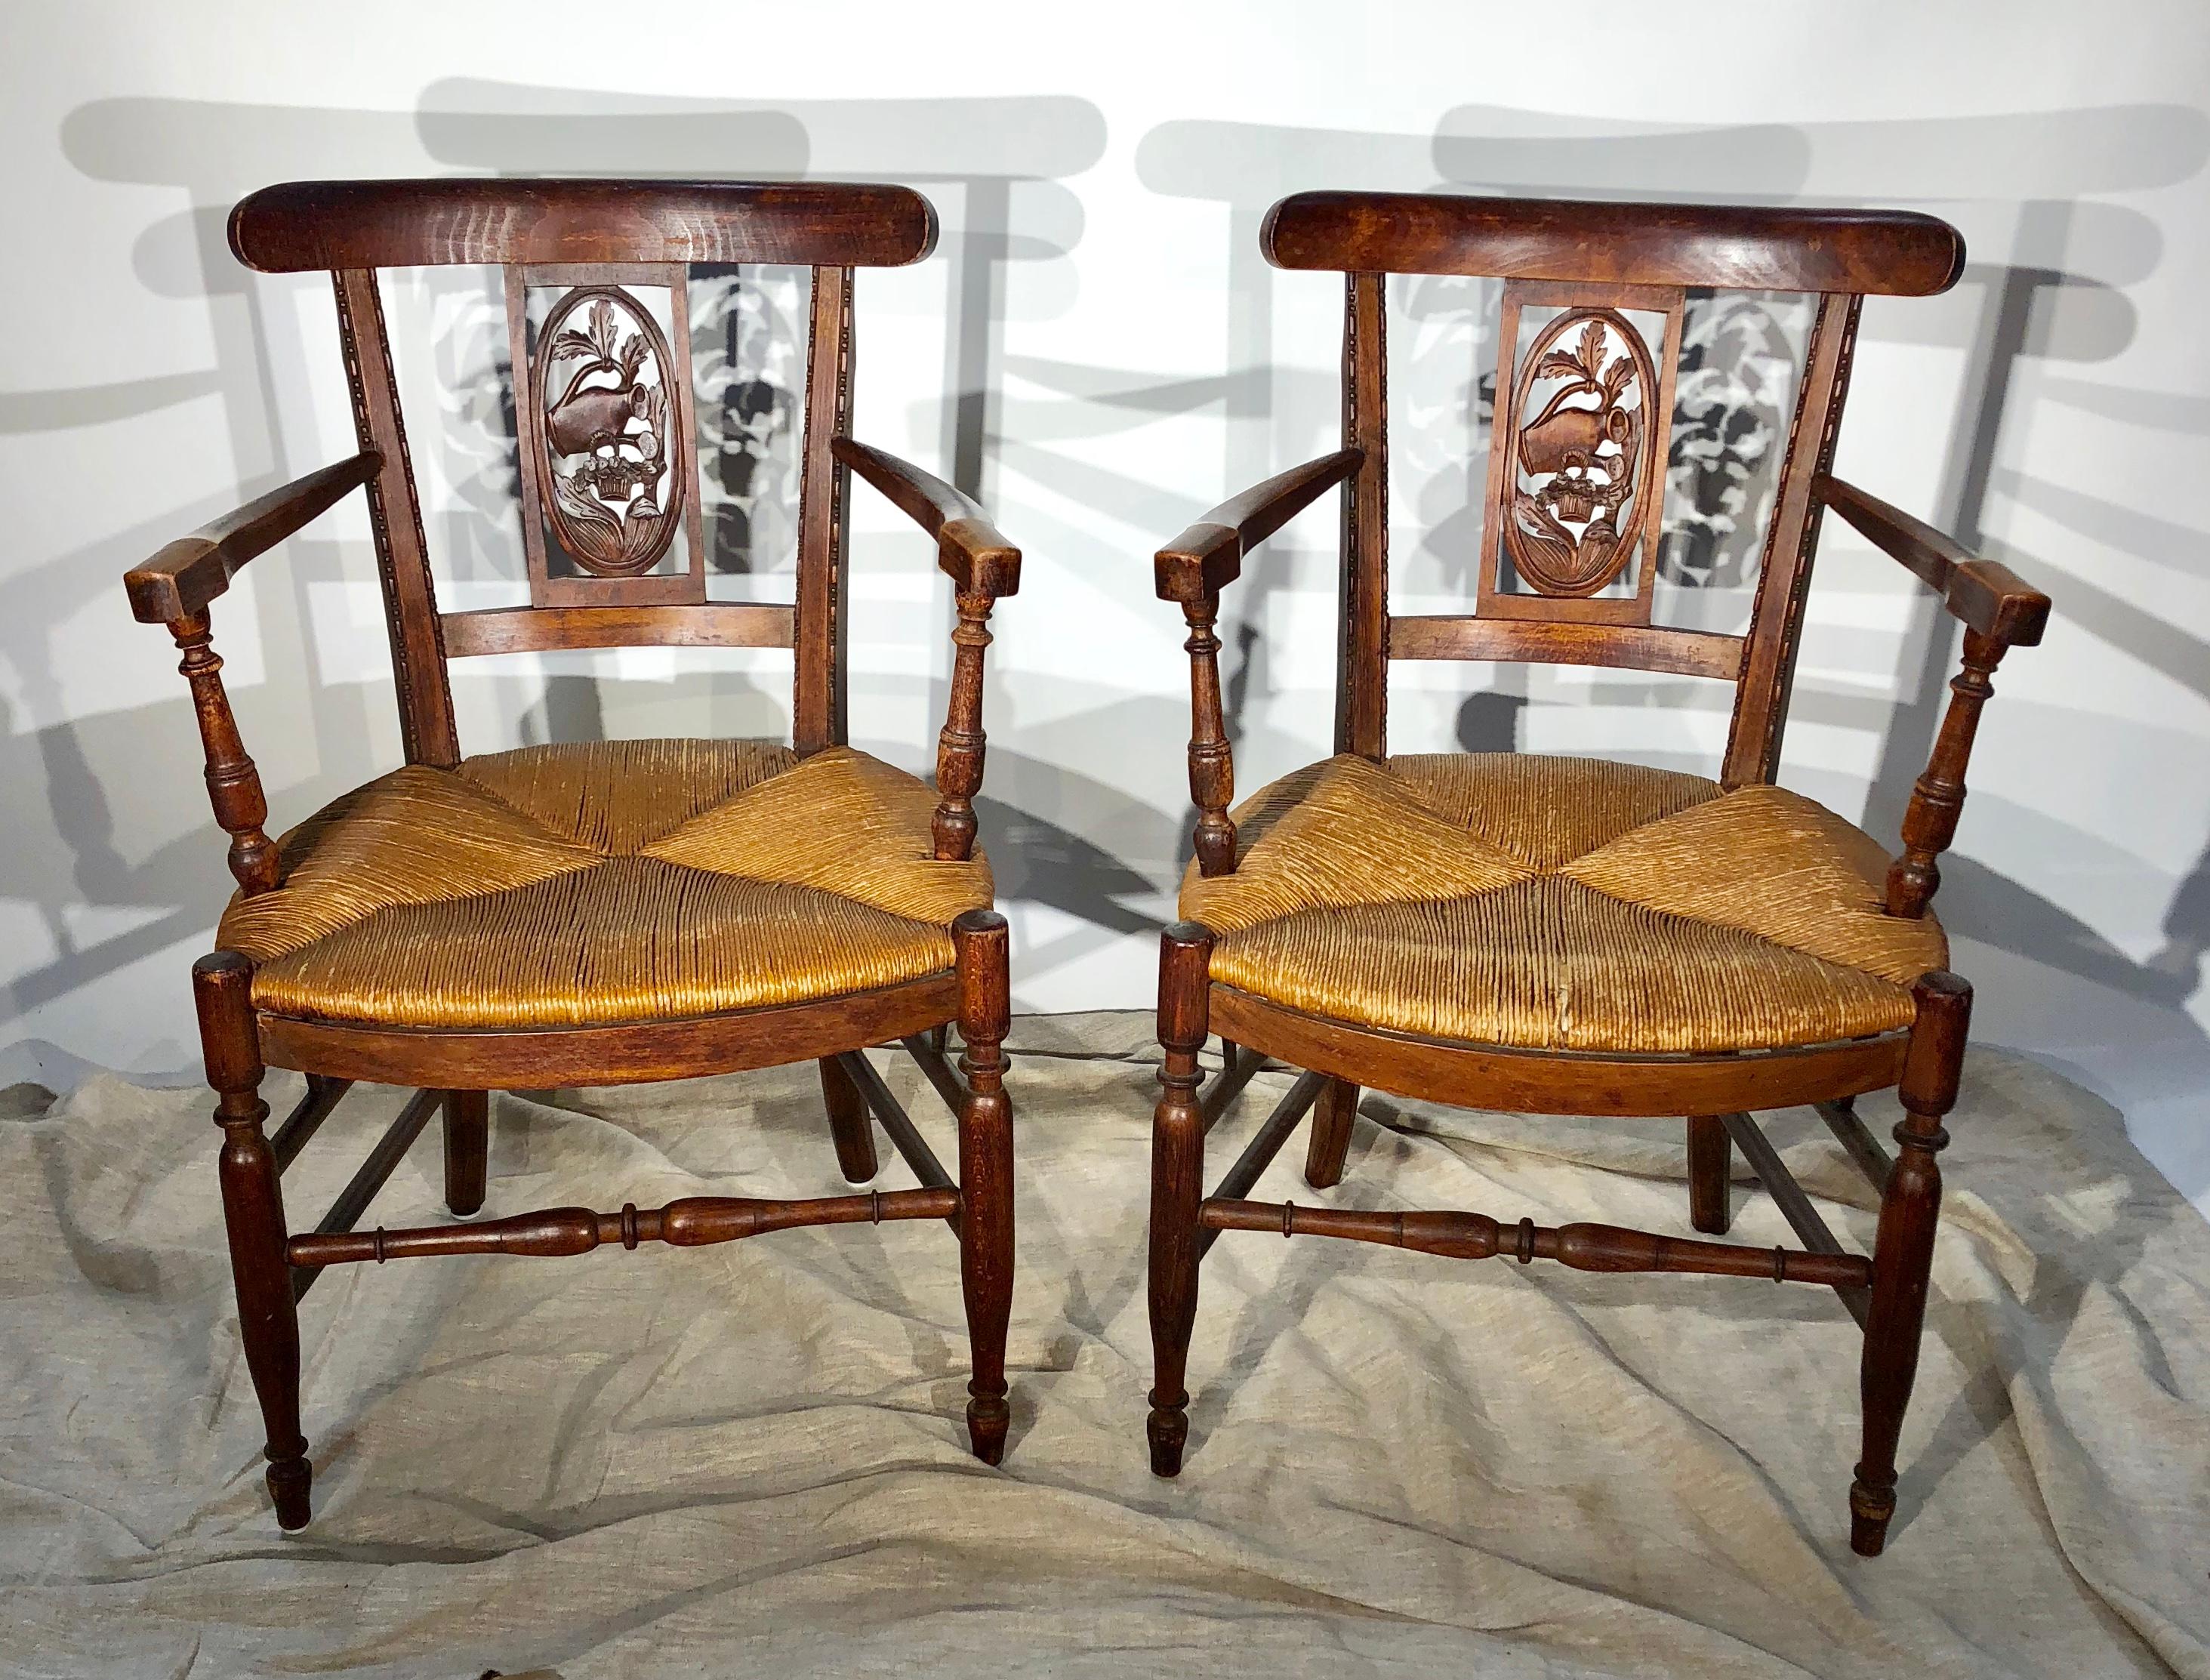 A pair of rush-seat armchairs, also called “bonne femme” chairs in beechwood, with yoke backs and carved panels with a gardening motif, circa 1870, French.